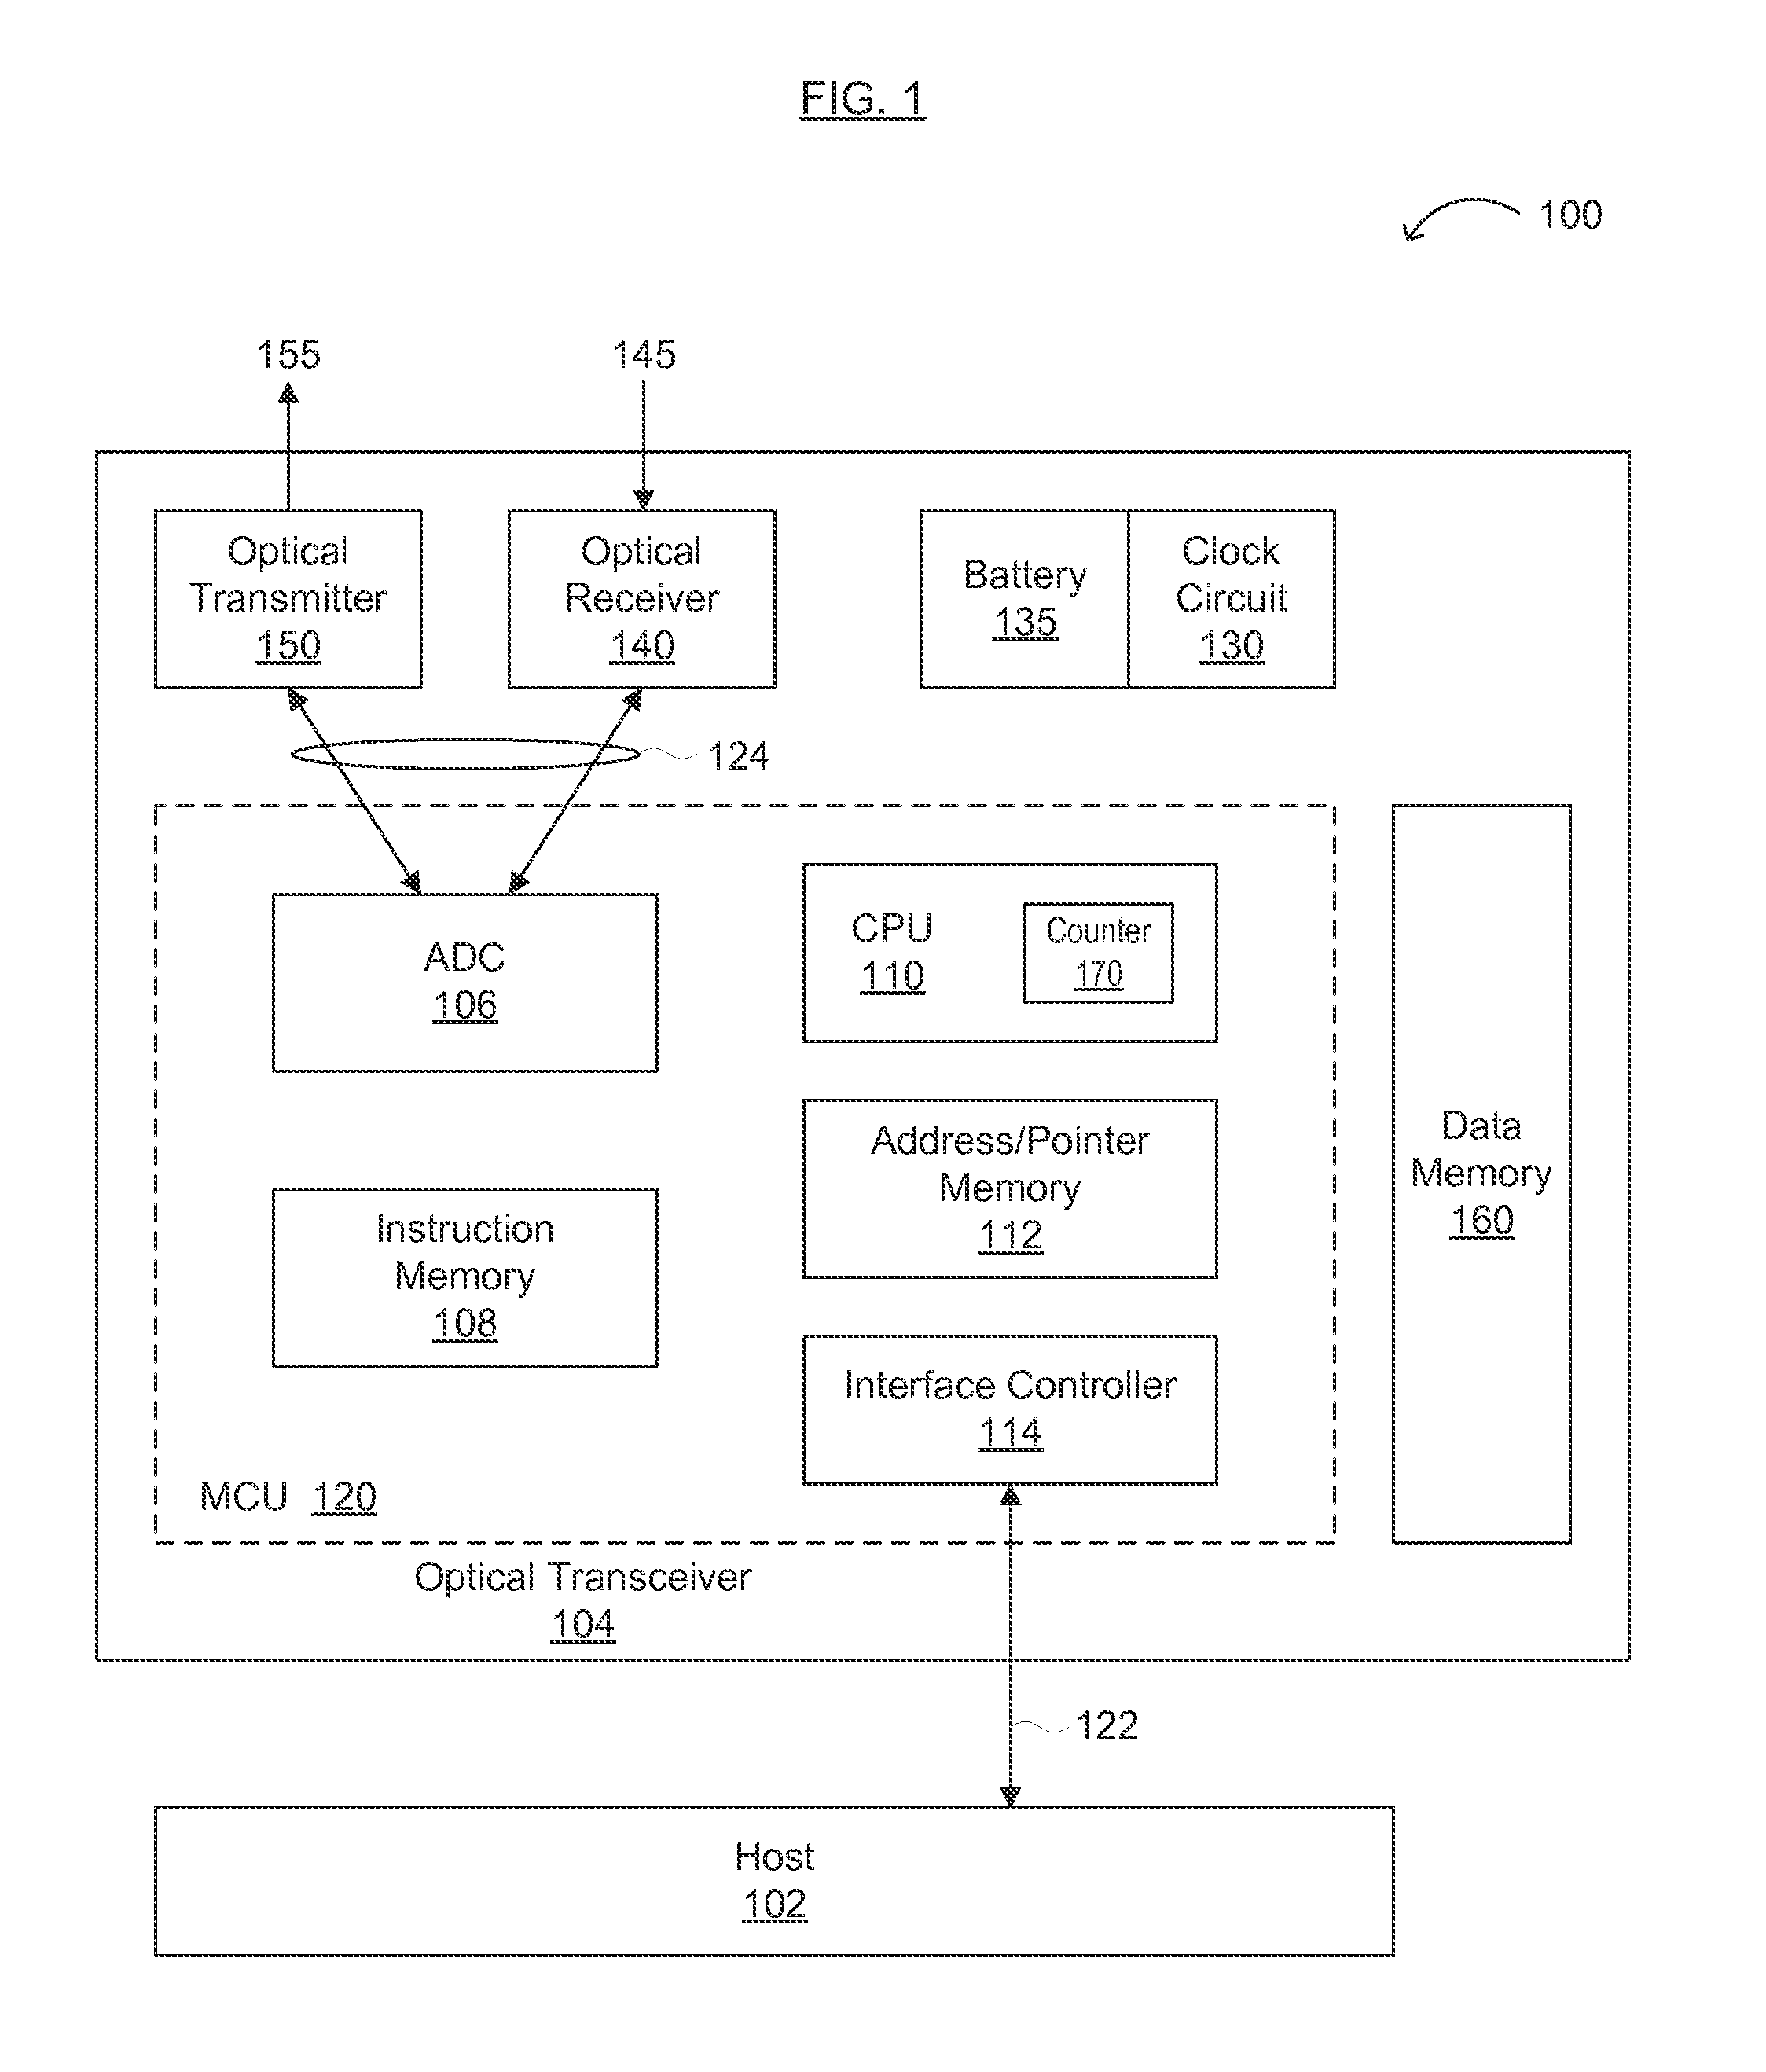 Enhanced Status Monitoring, Storage and Reporting for Optical Transceivers